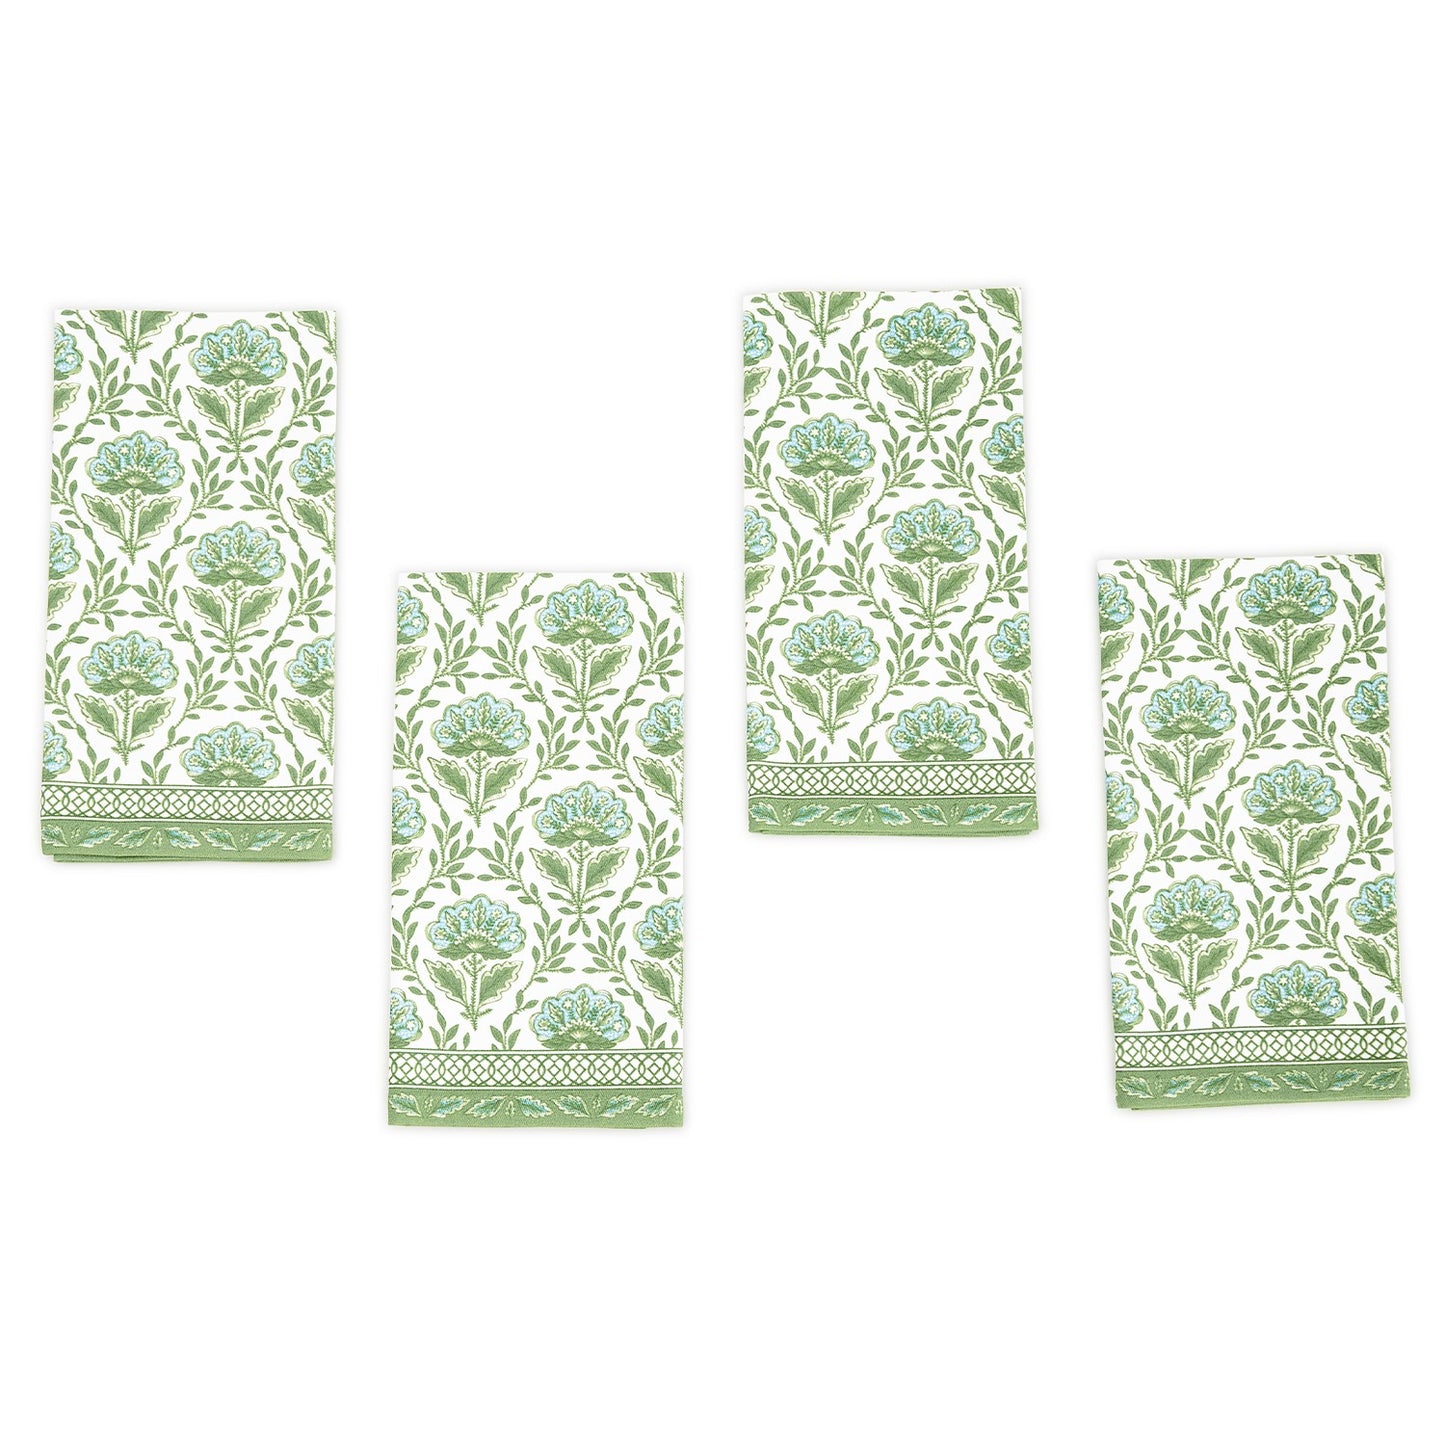 Countryside S/4 Floral Pattern Napkins